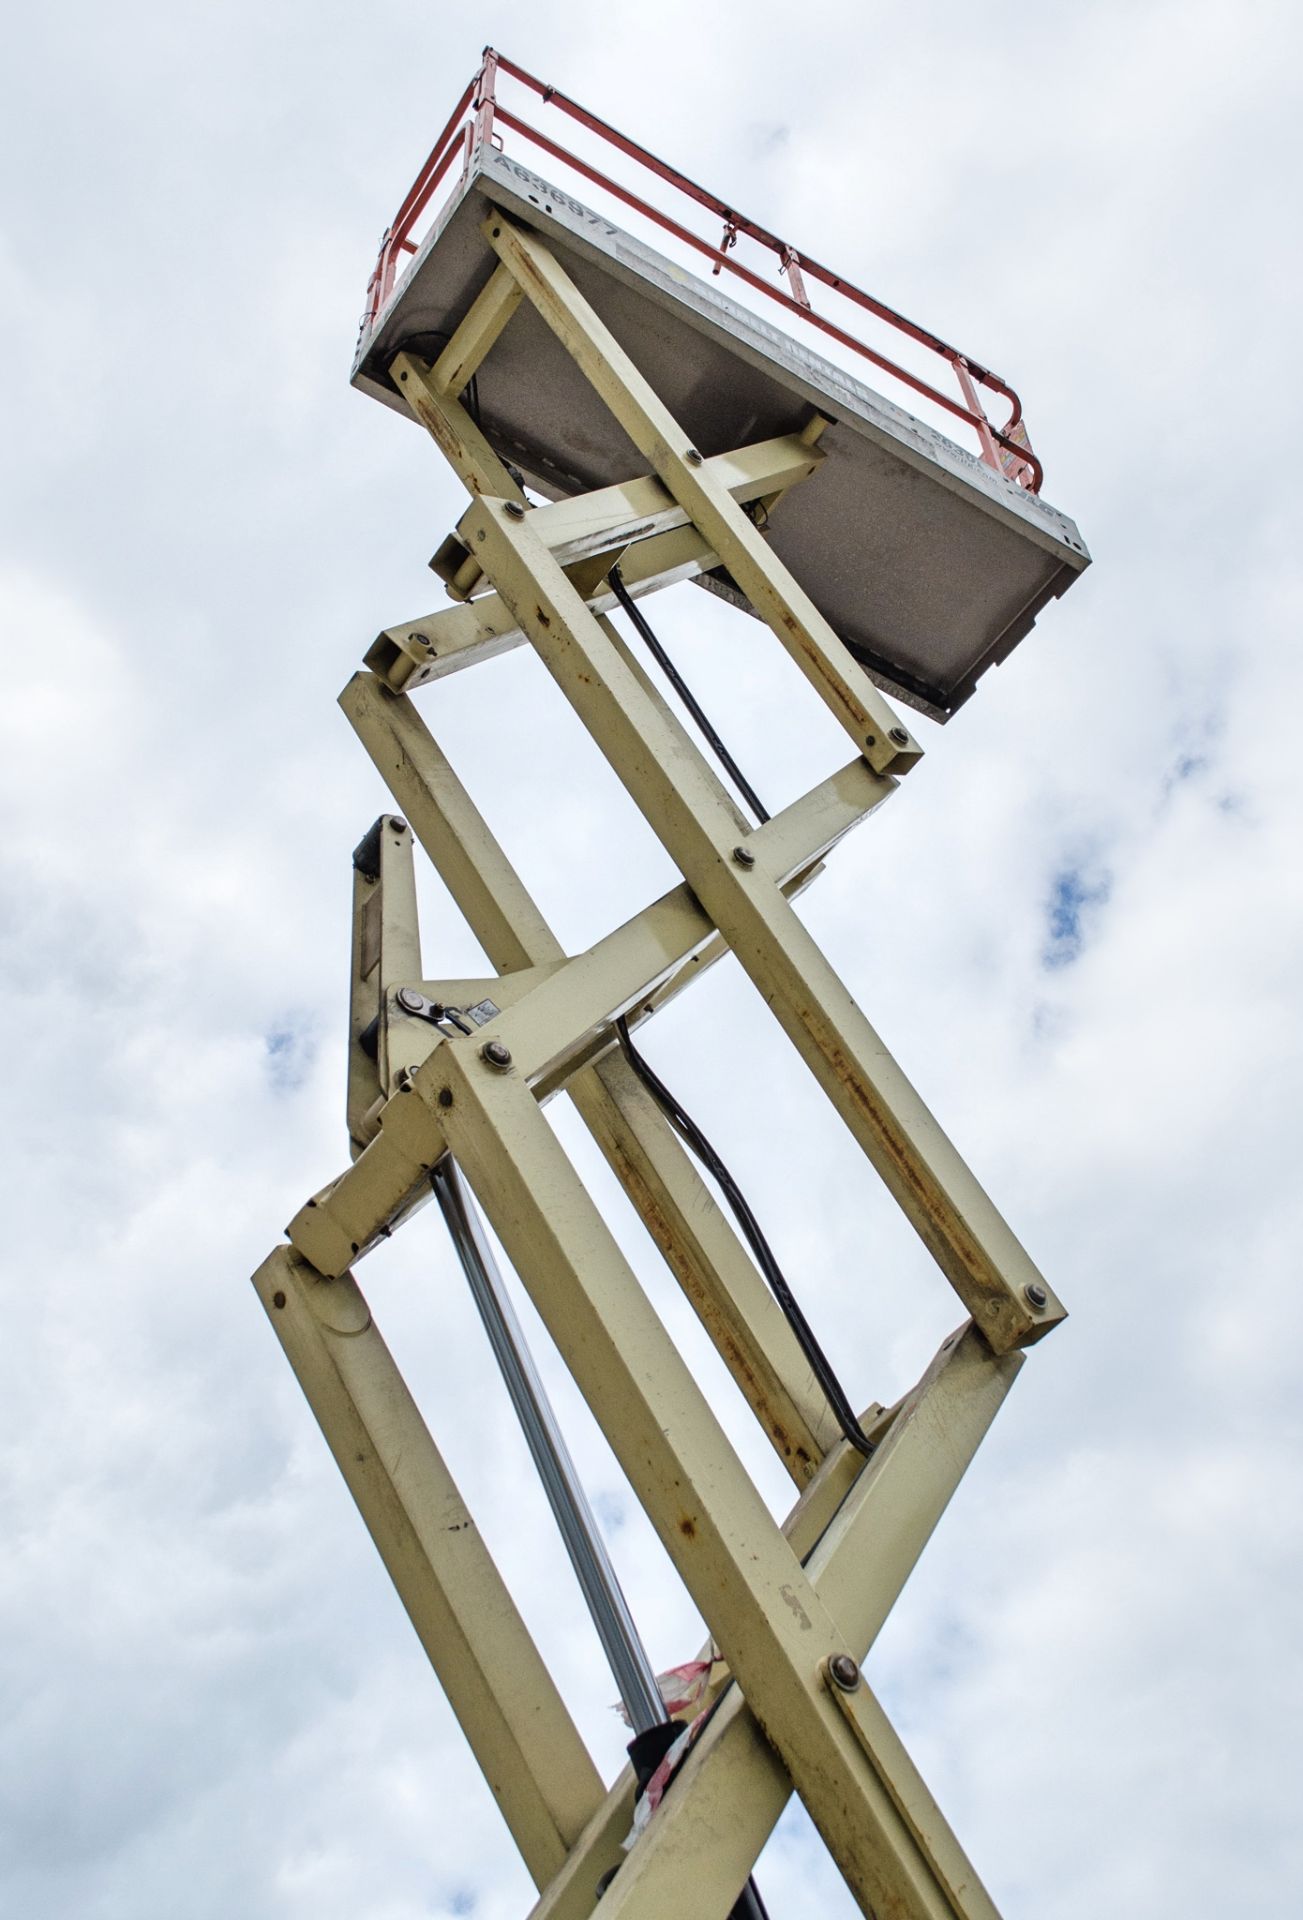 JLG 2630 ES battery electric scissor lift Year: 2014 S/N: 237301 Recorded Hours: 251 A636977 - Image 6 of 10